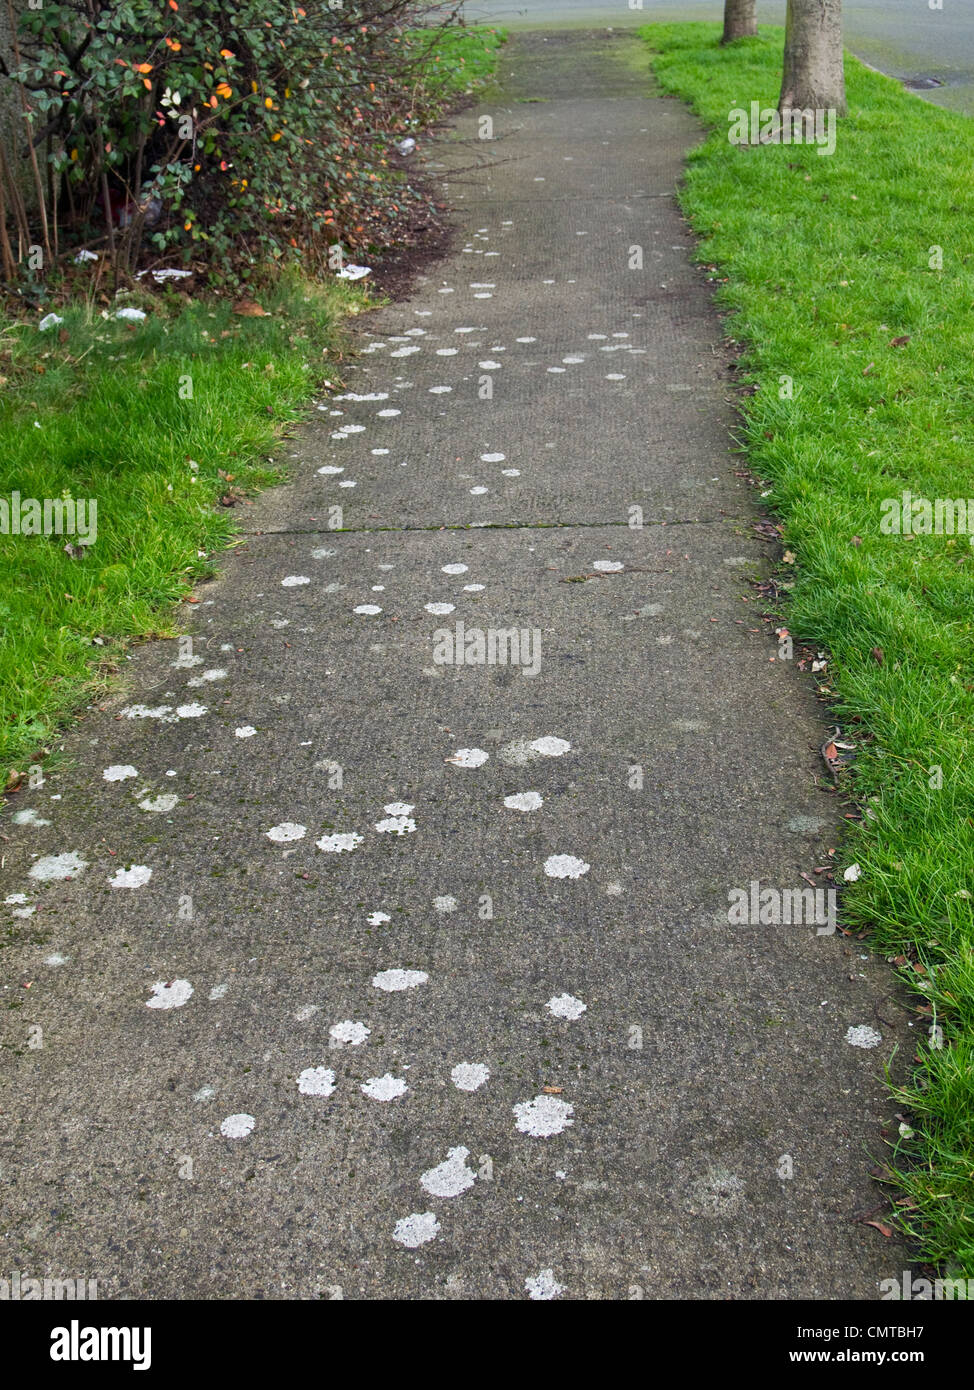 White lichen spots growing on a  footpath indicating clean air, free of pollution. Stock Photo